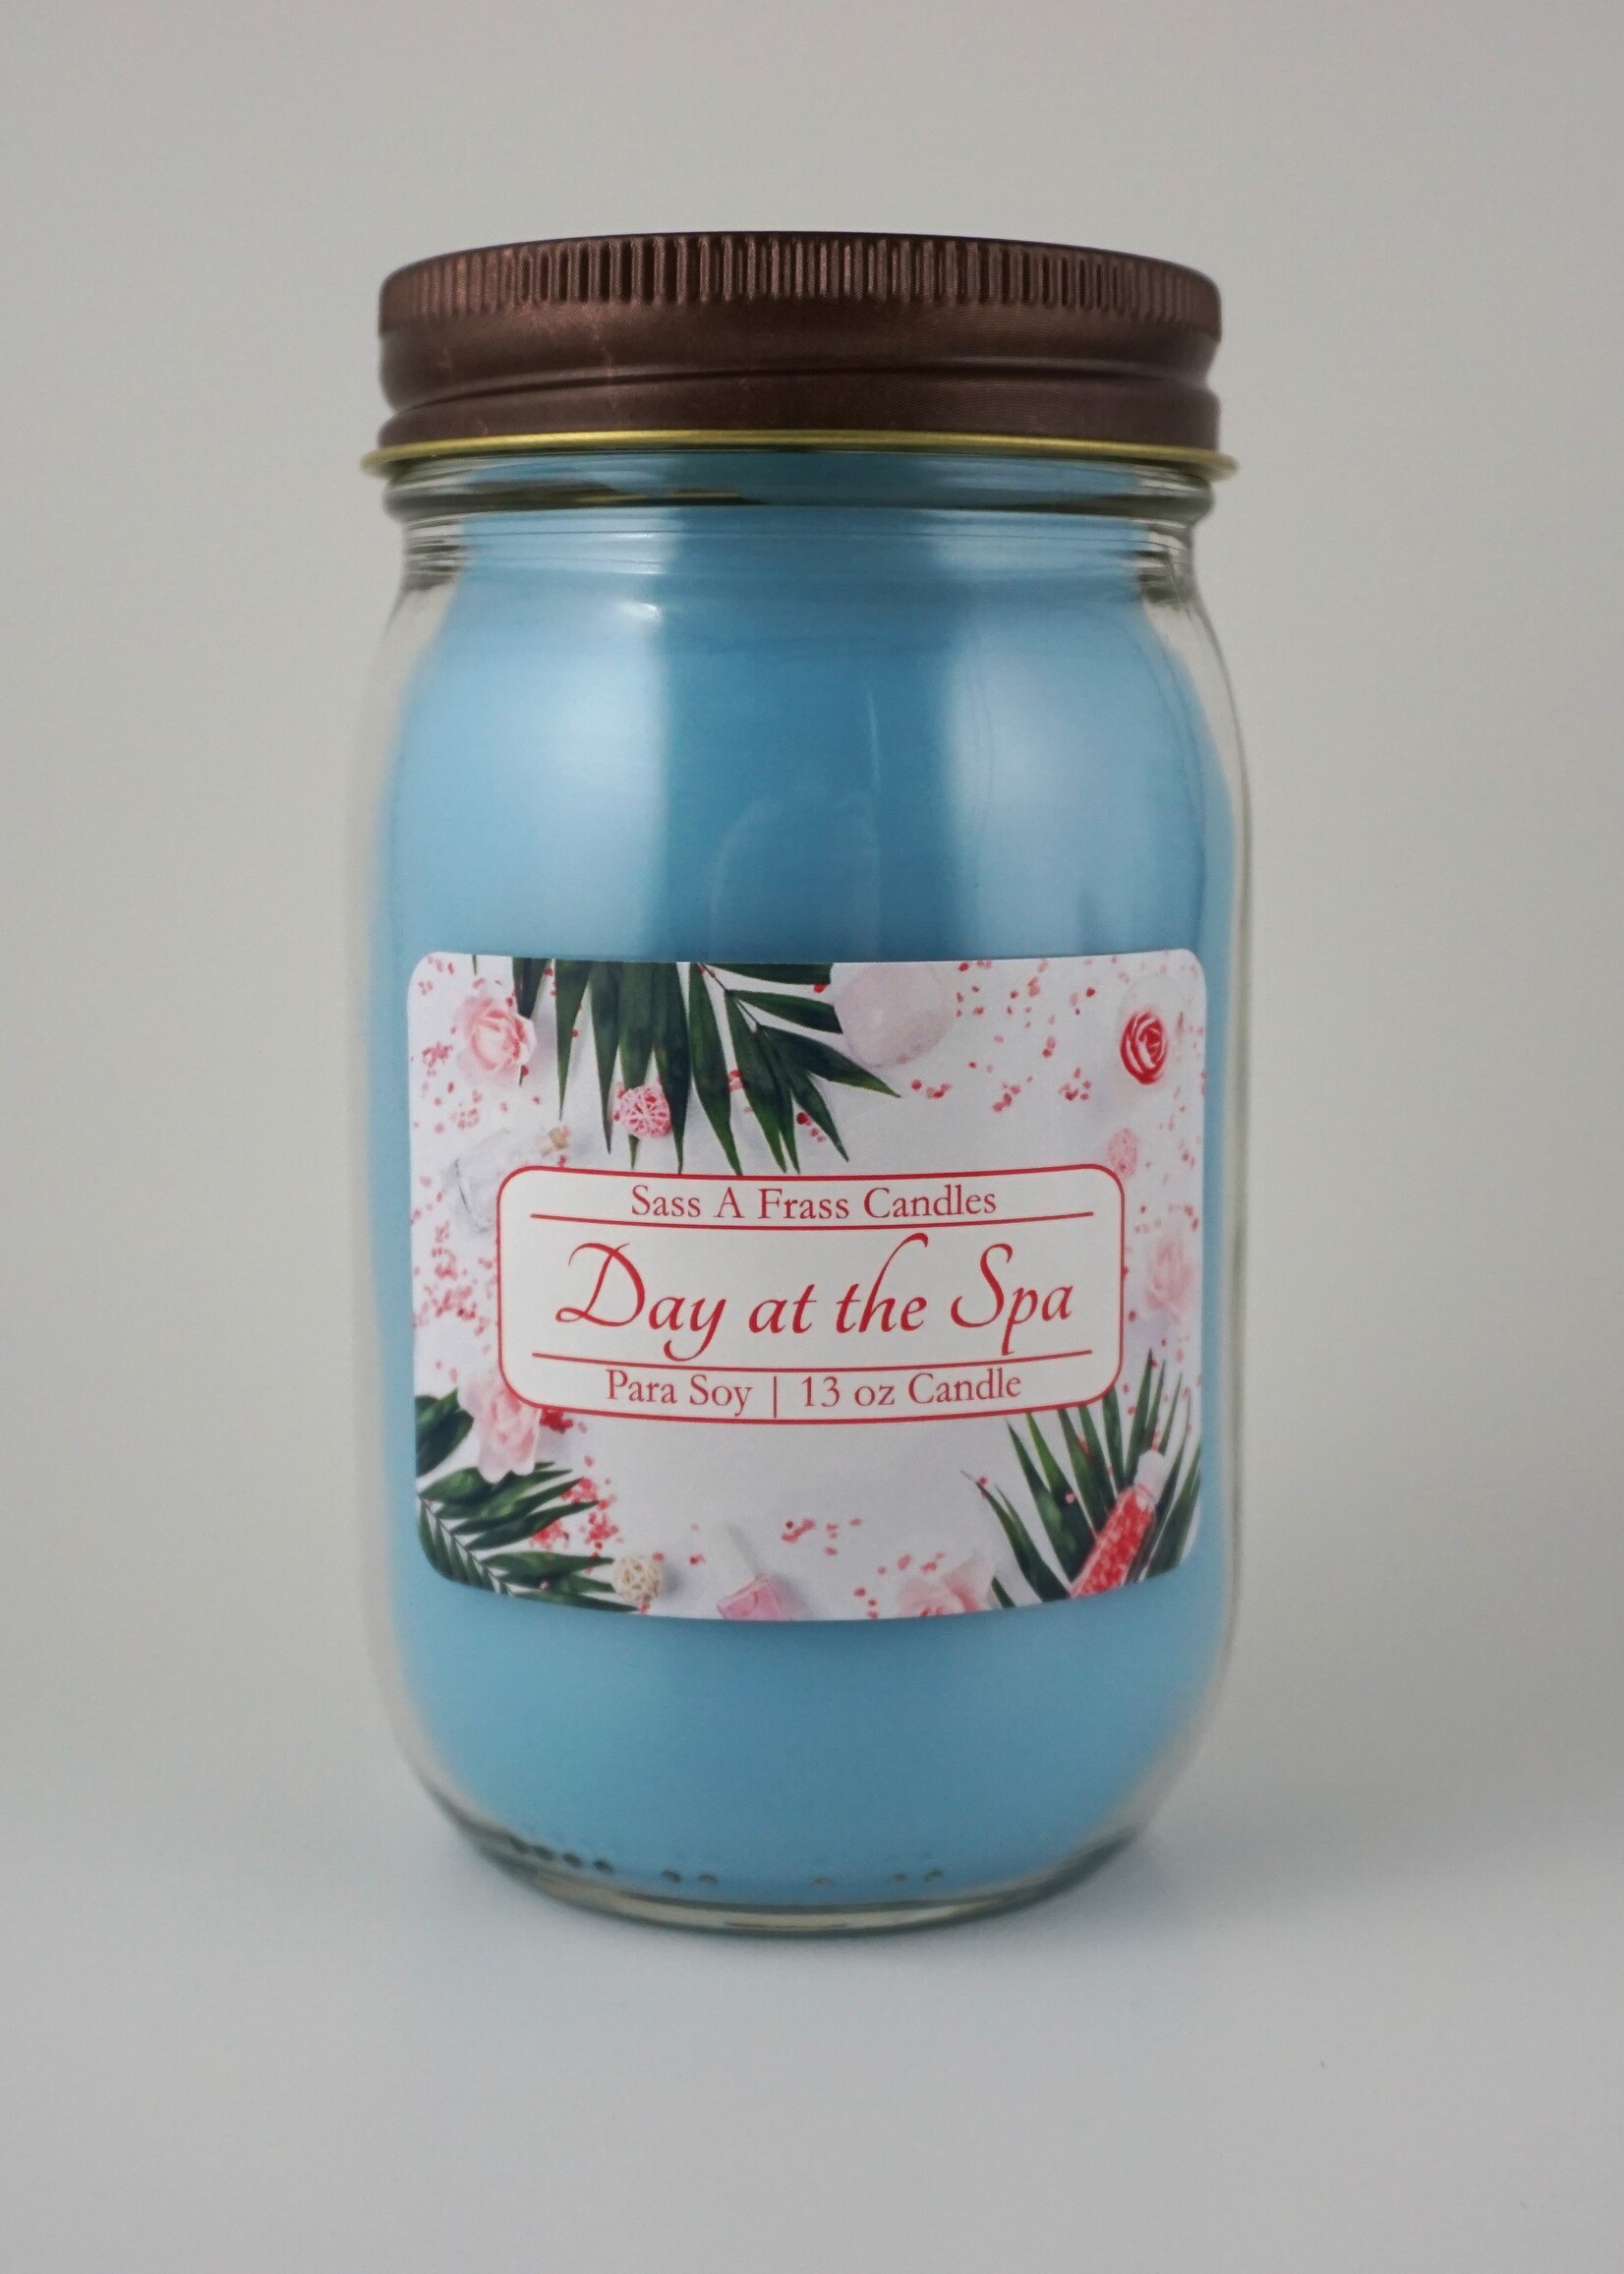 Day at the Spa 13 oz Candle